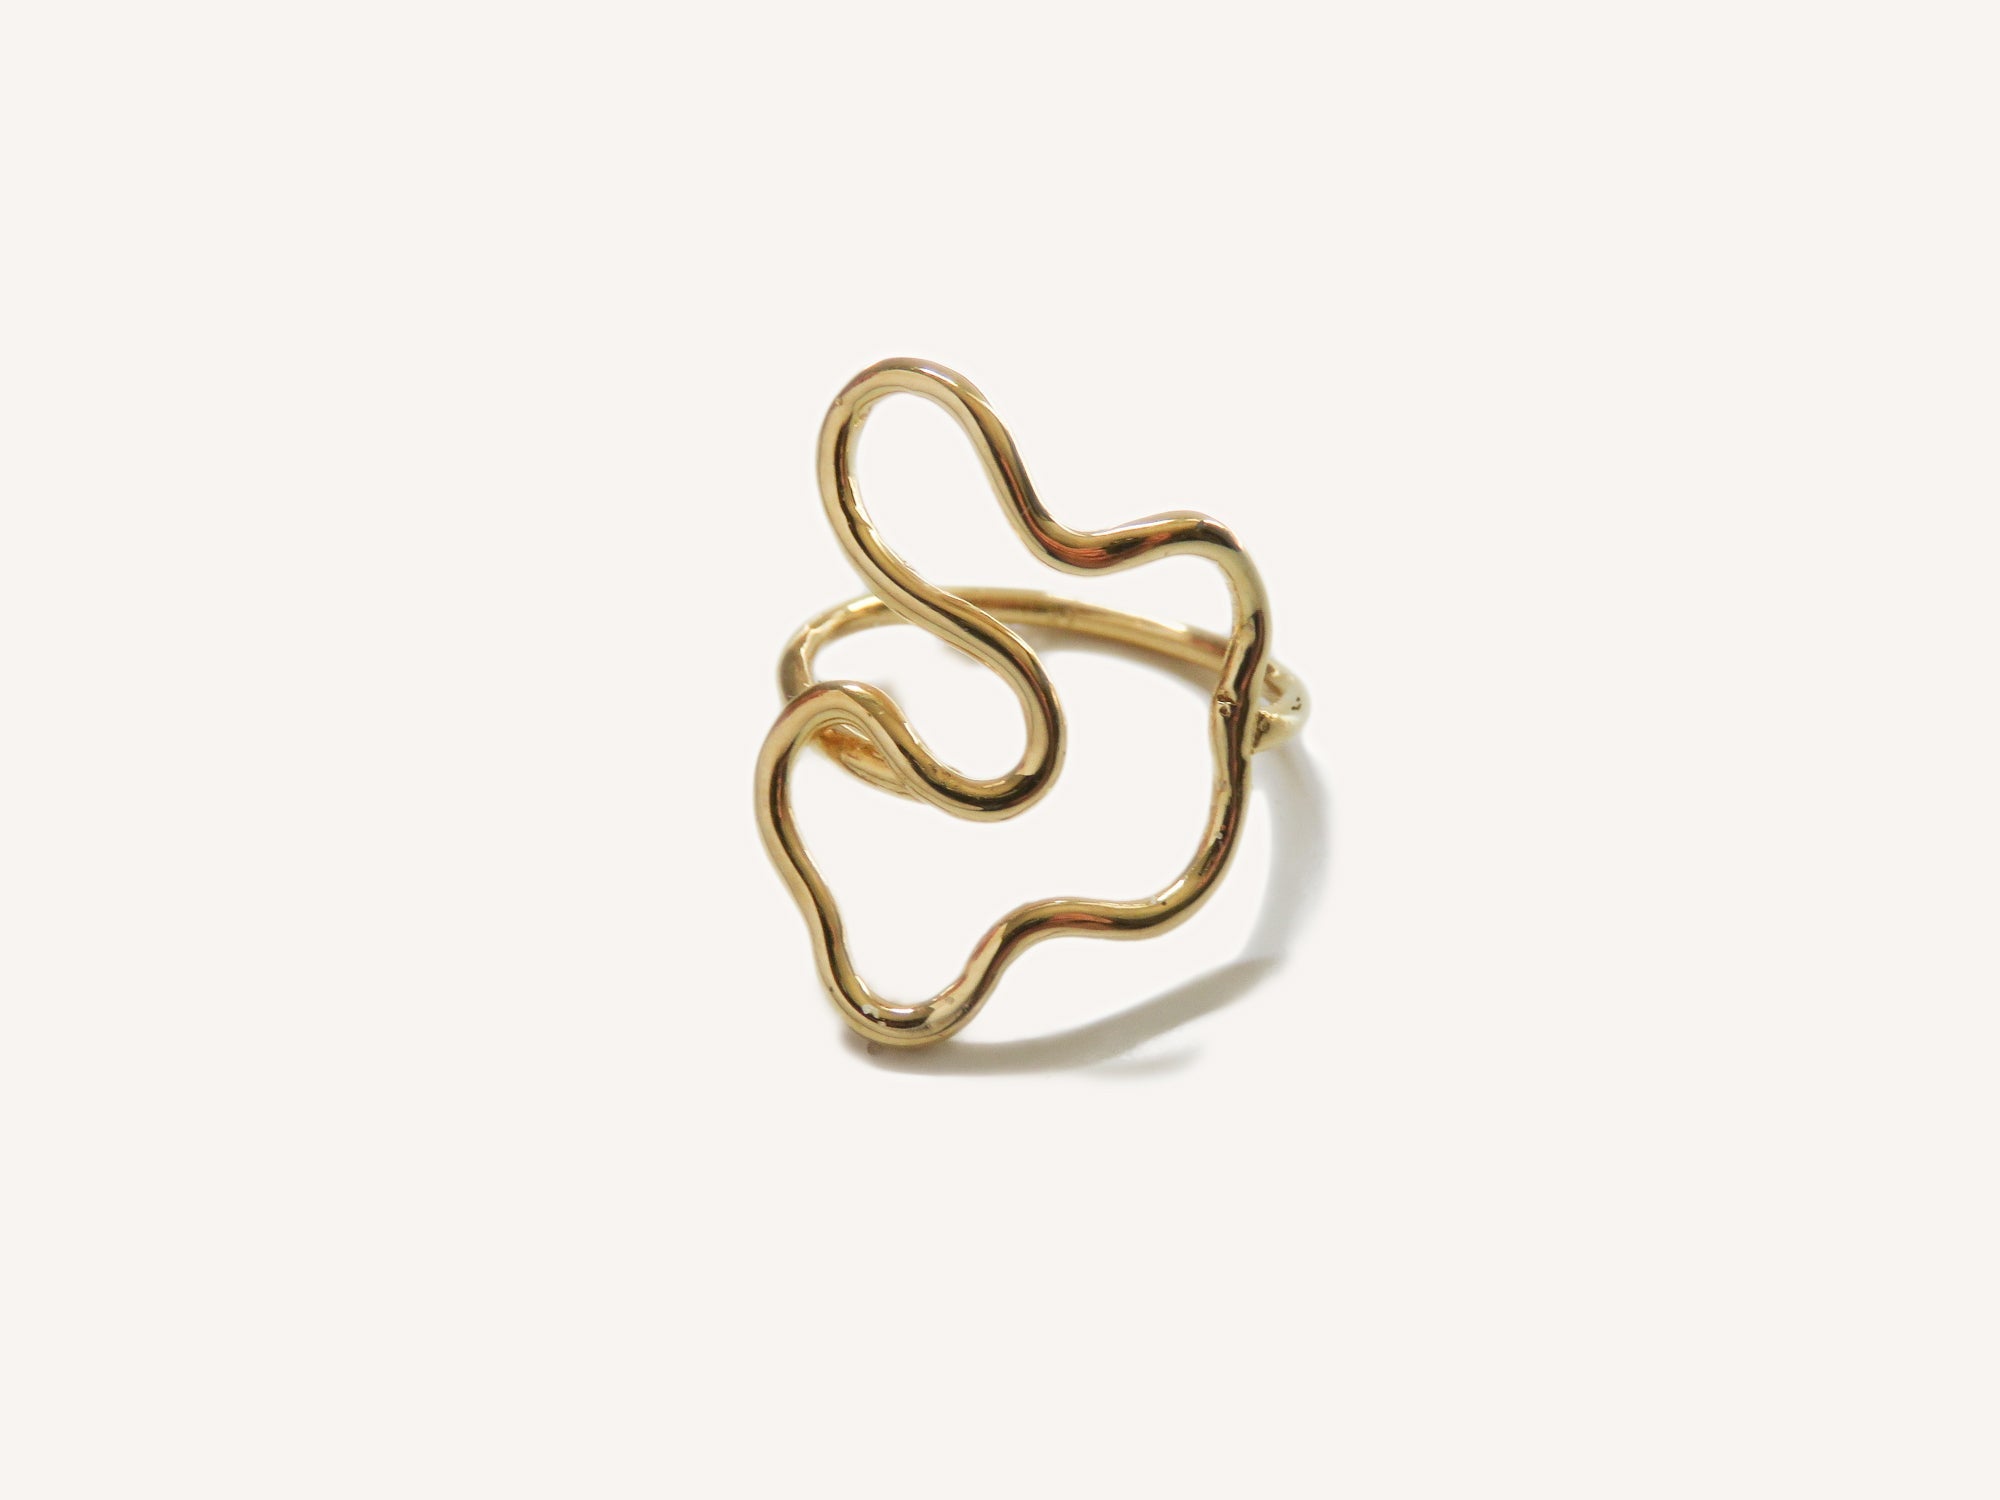 Puddle Ring - Gold Abstract Ring - Dea Dia